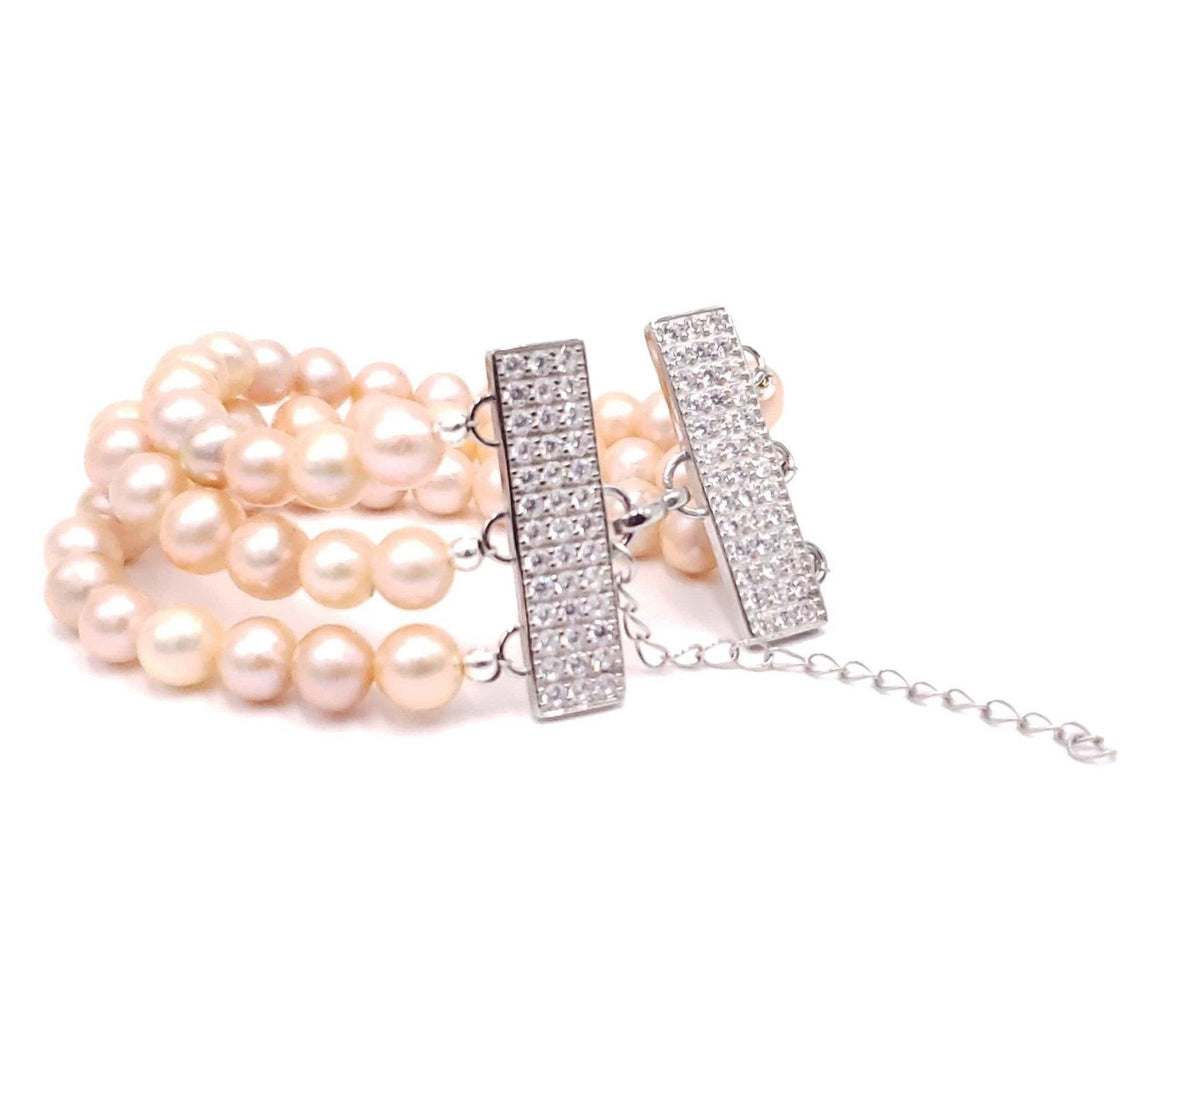 Super 3 Strand Pearl Bracelet set in 14K White Gold with Diamond Accents, 7  inch - Colonial Trading Company